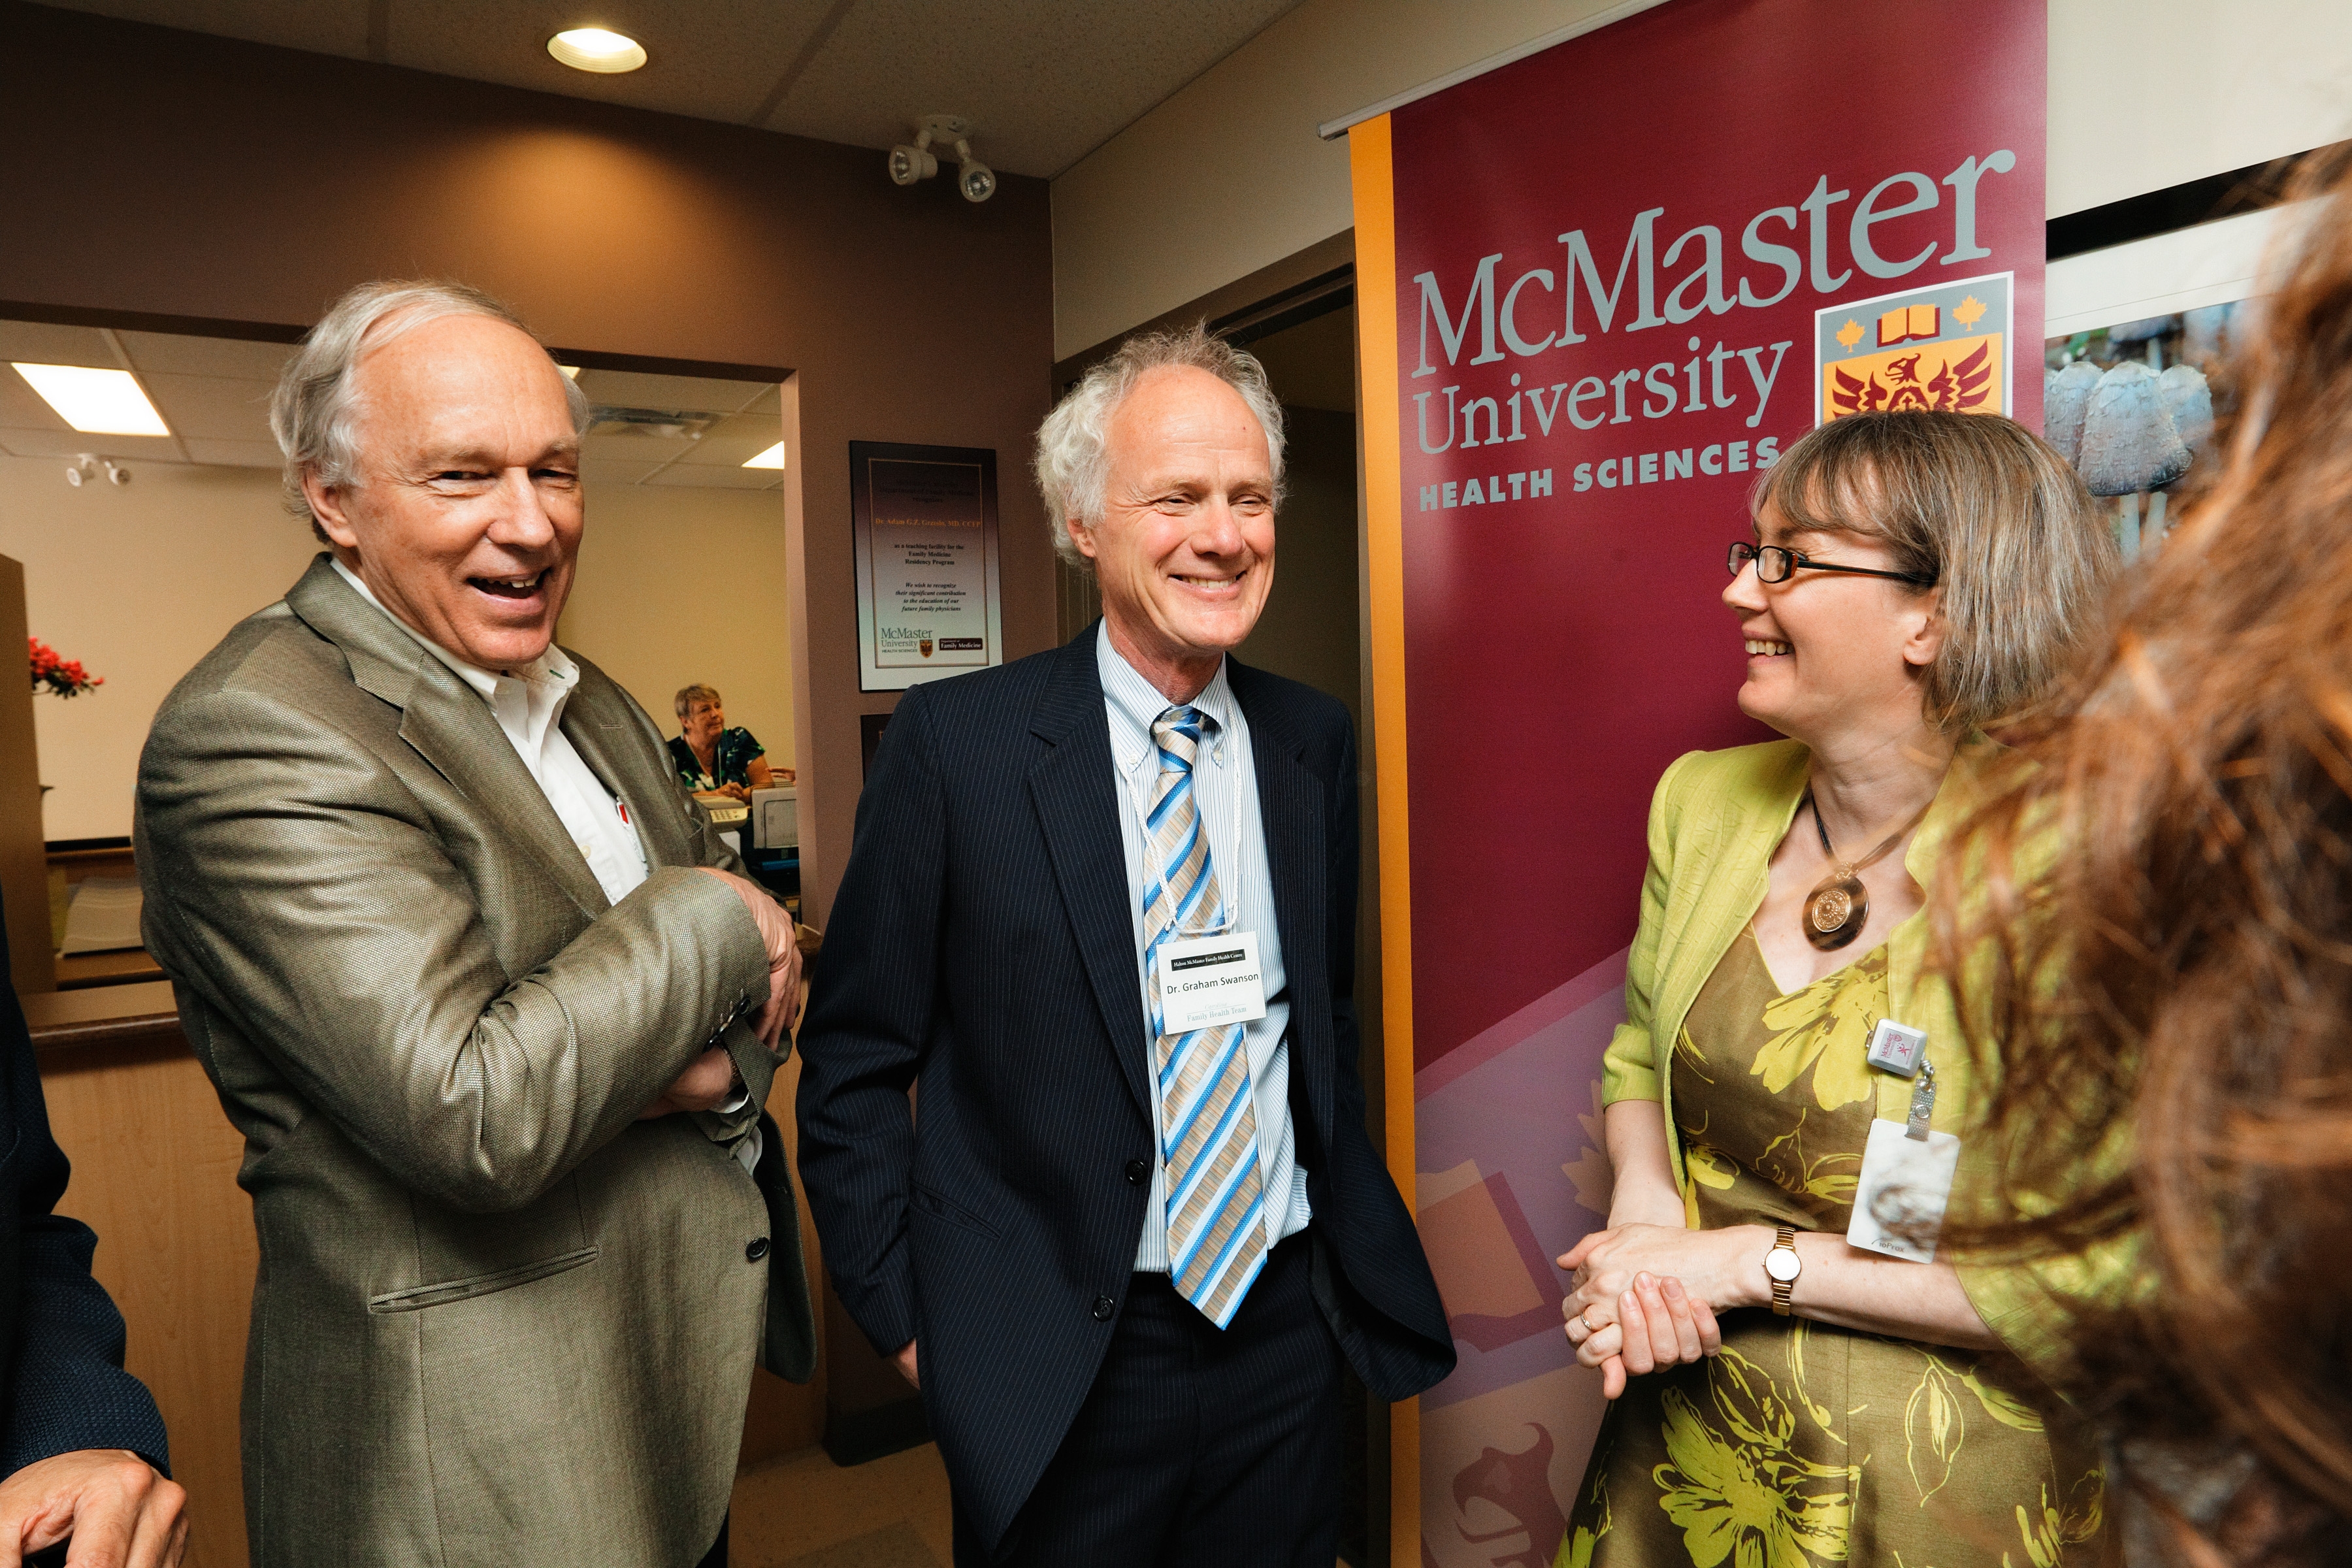 Three people stand in front of a maroon banner that says McMaster University Health Sciences on it